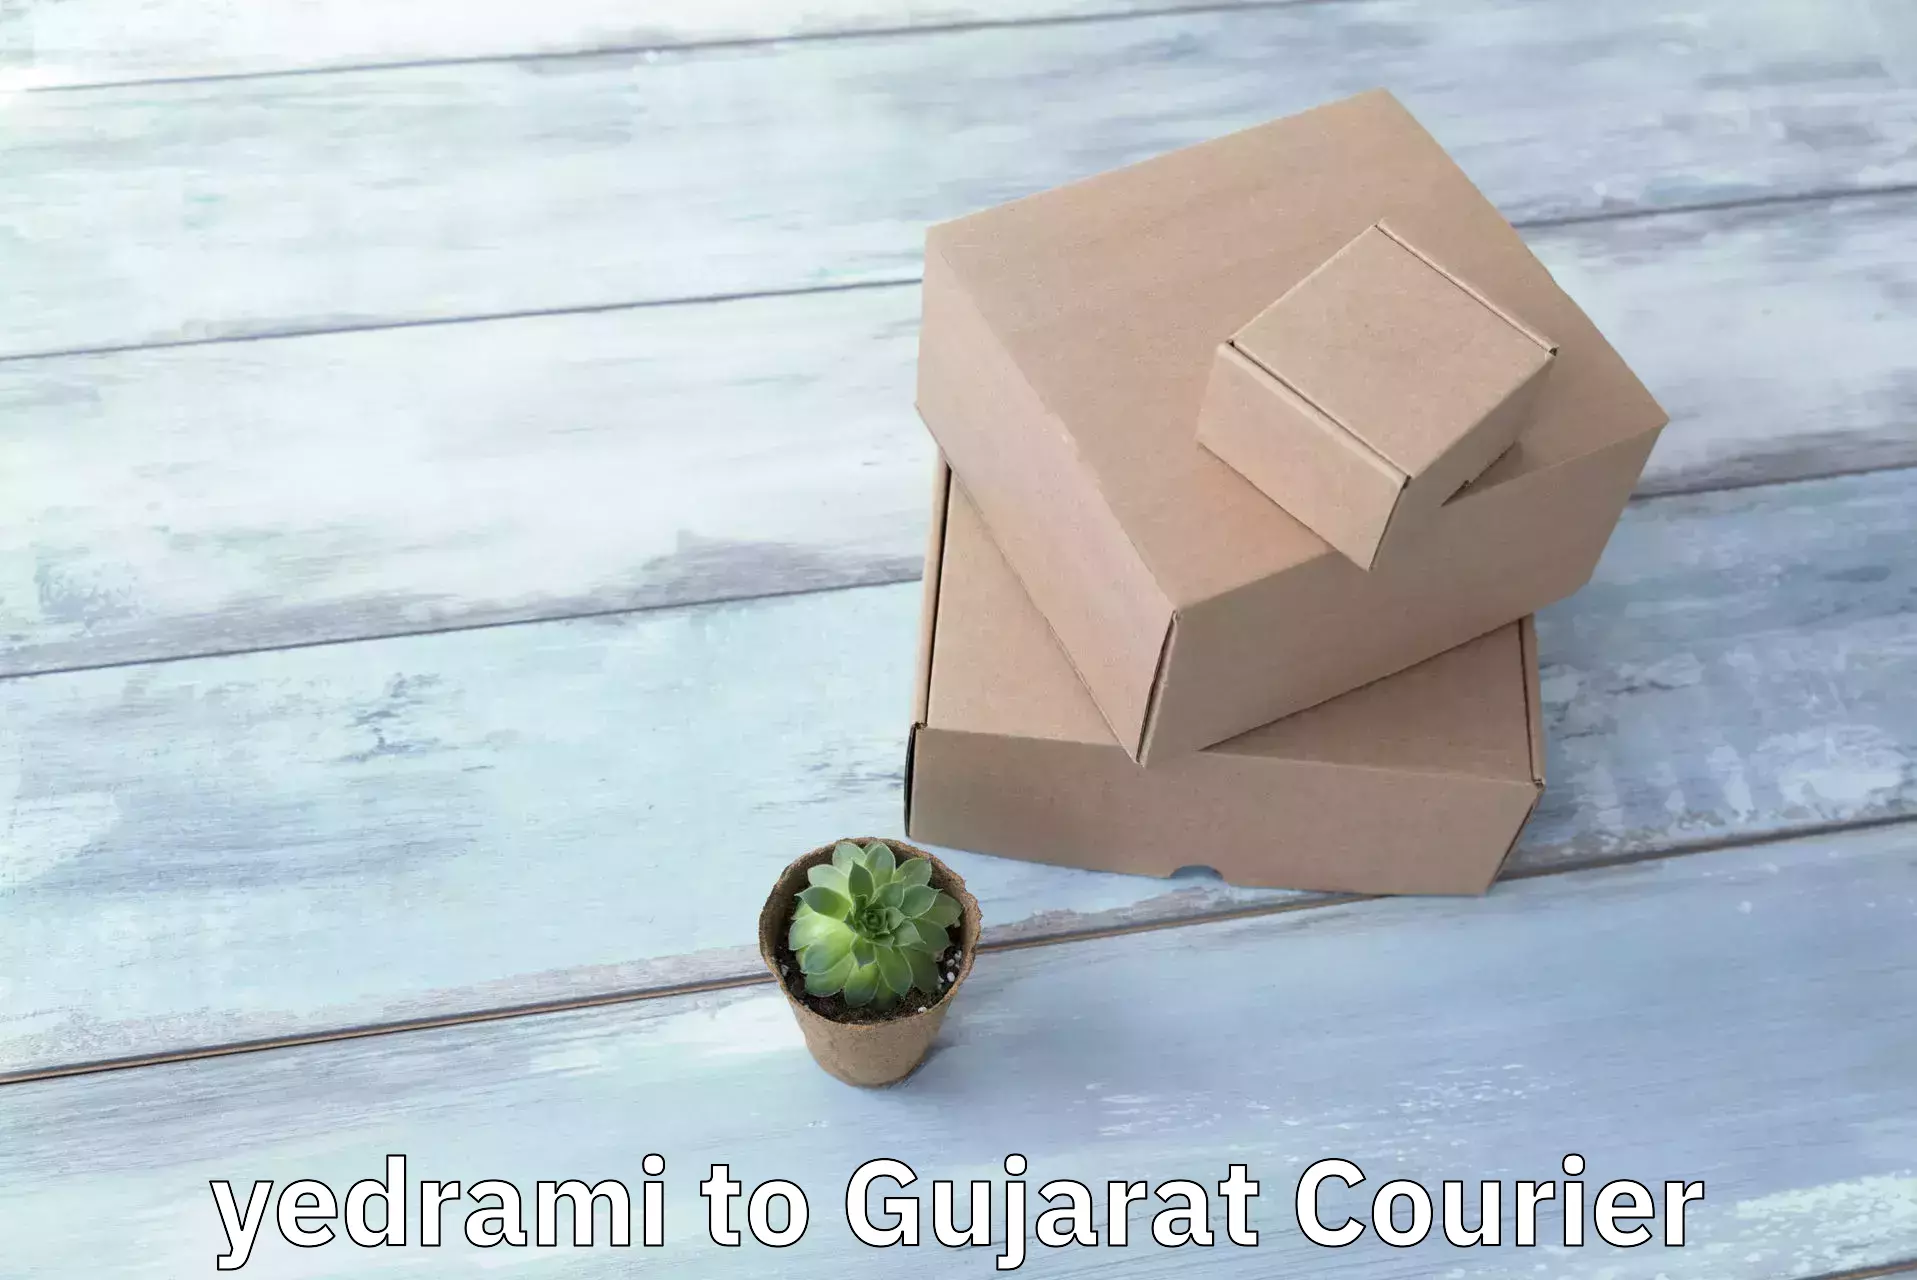 Cash on delivery service yedrami to Gujarat